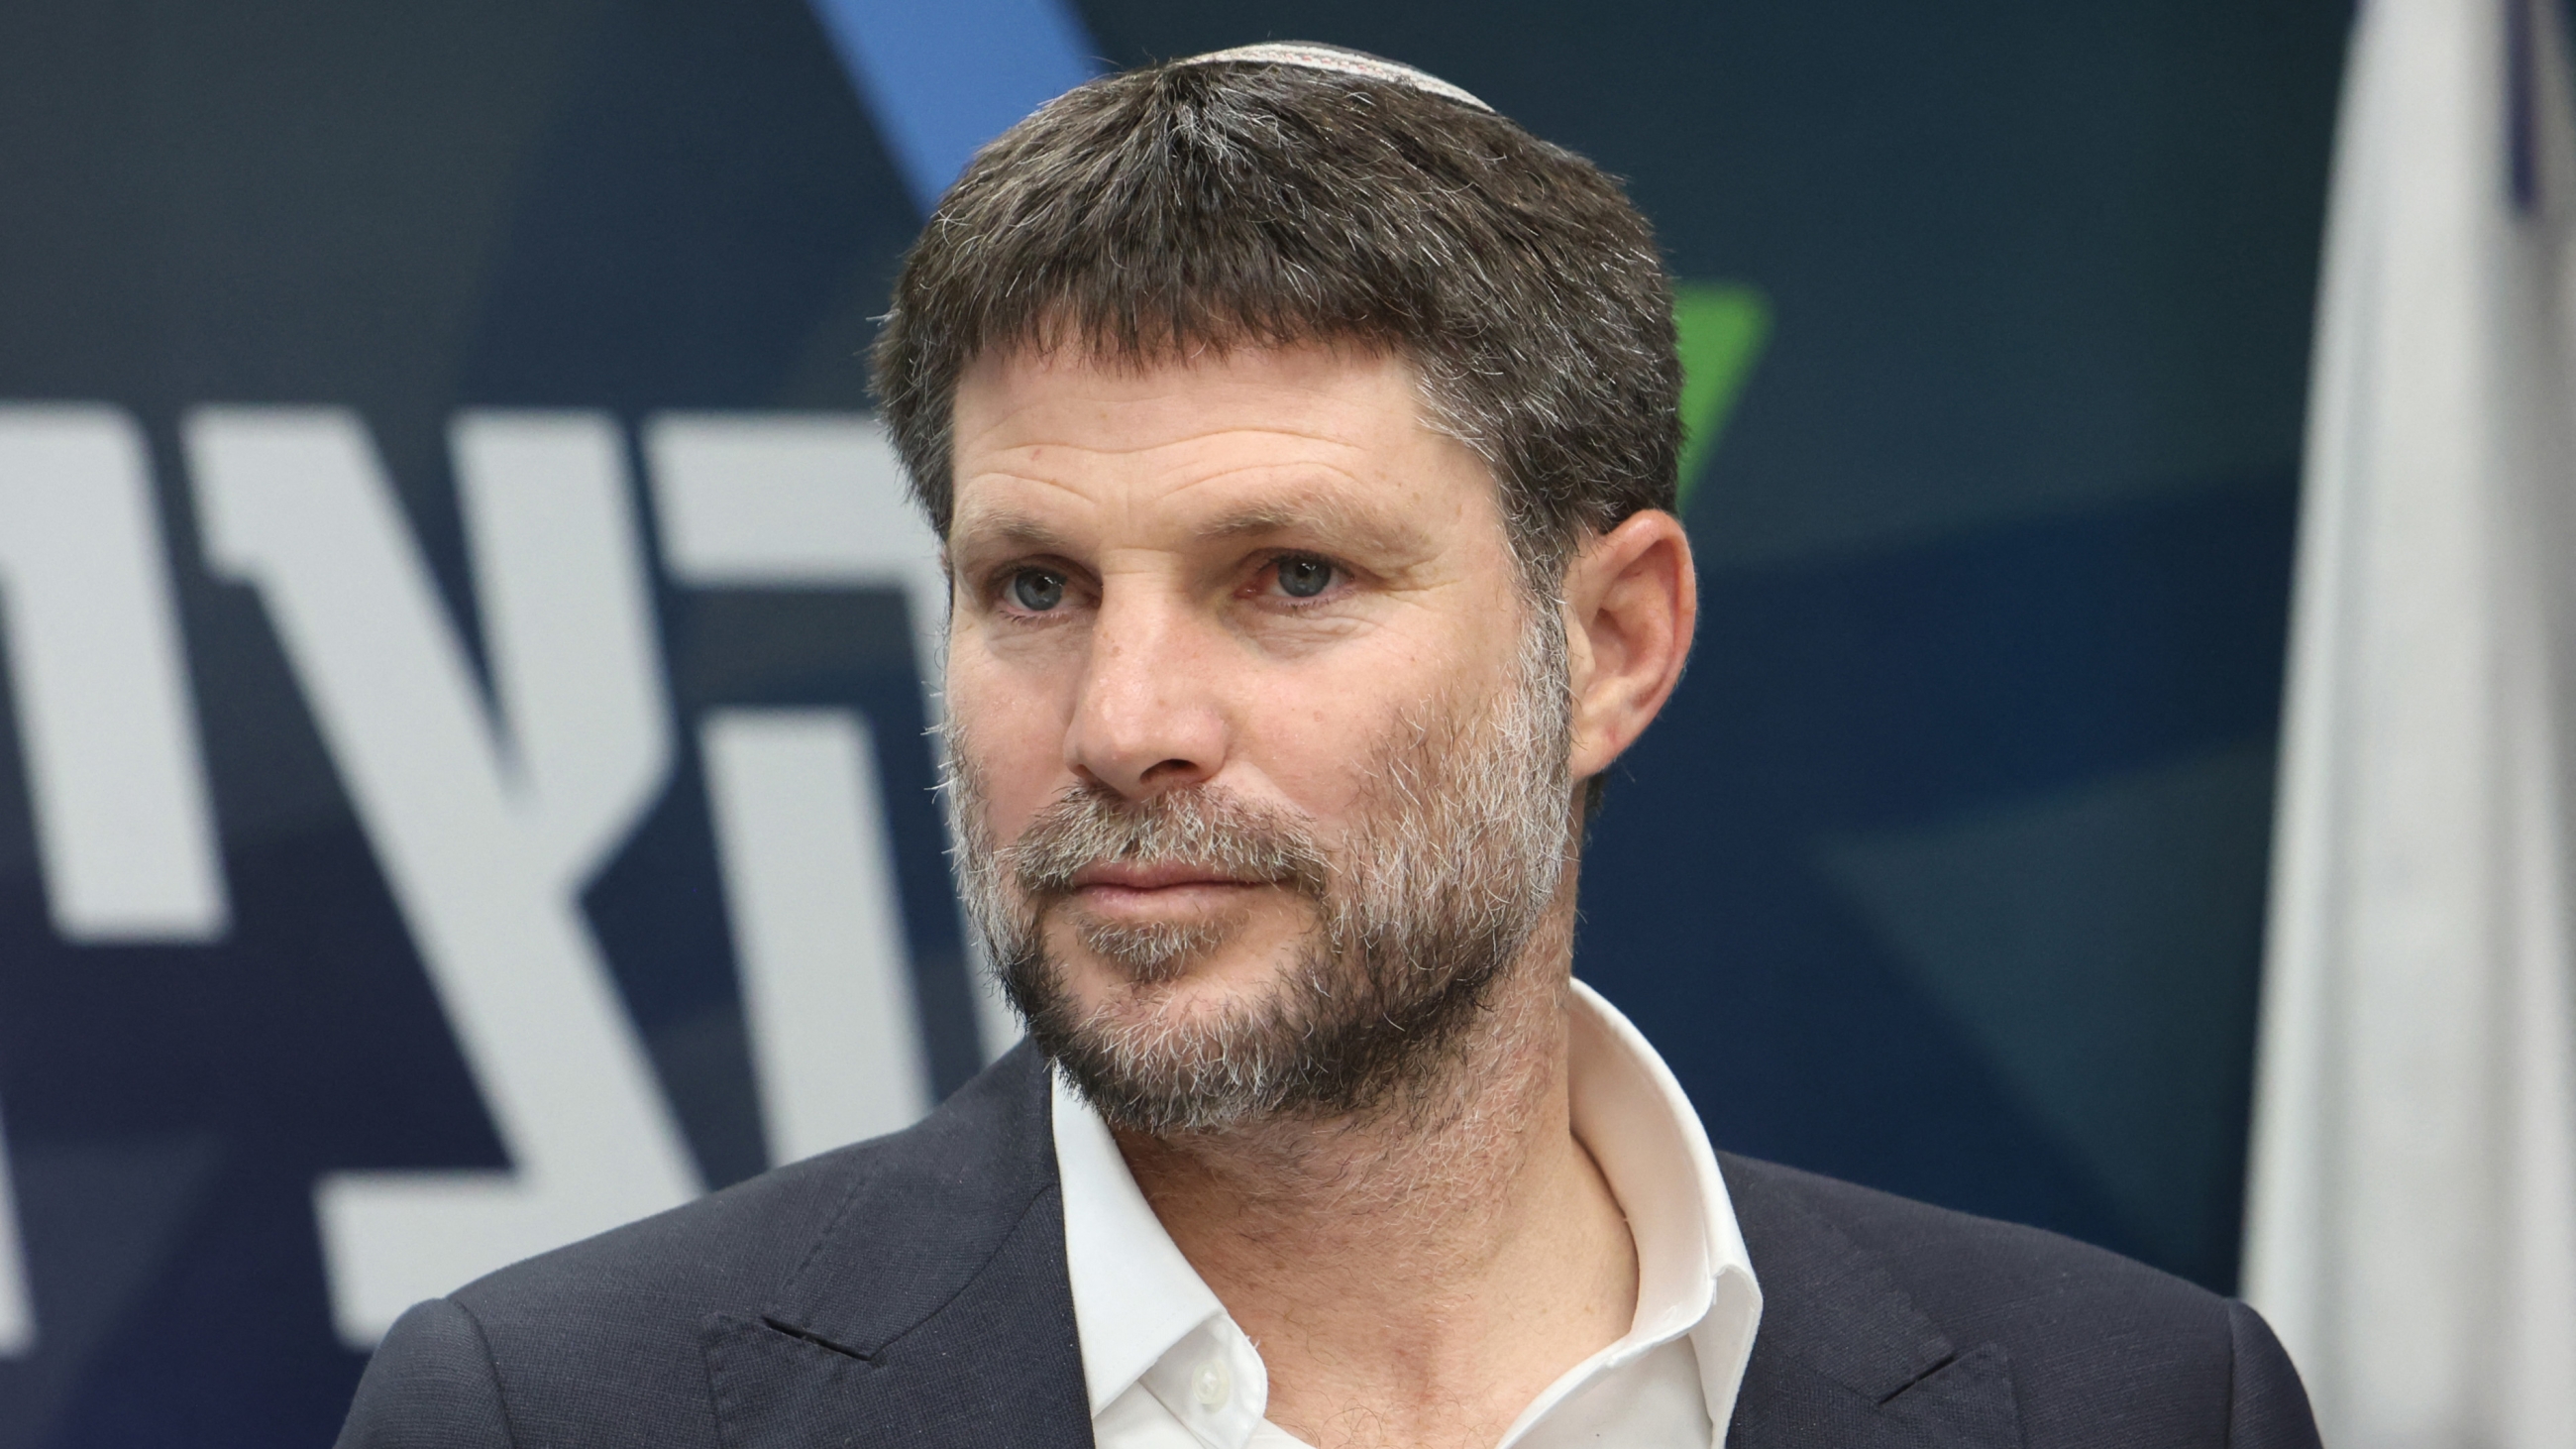 Israel's Finance Minister and leader of the Religious Zionist Party Bezalel Smotrich attends a meeting at the parliament, 20 March 2023 (AFP)